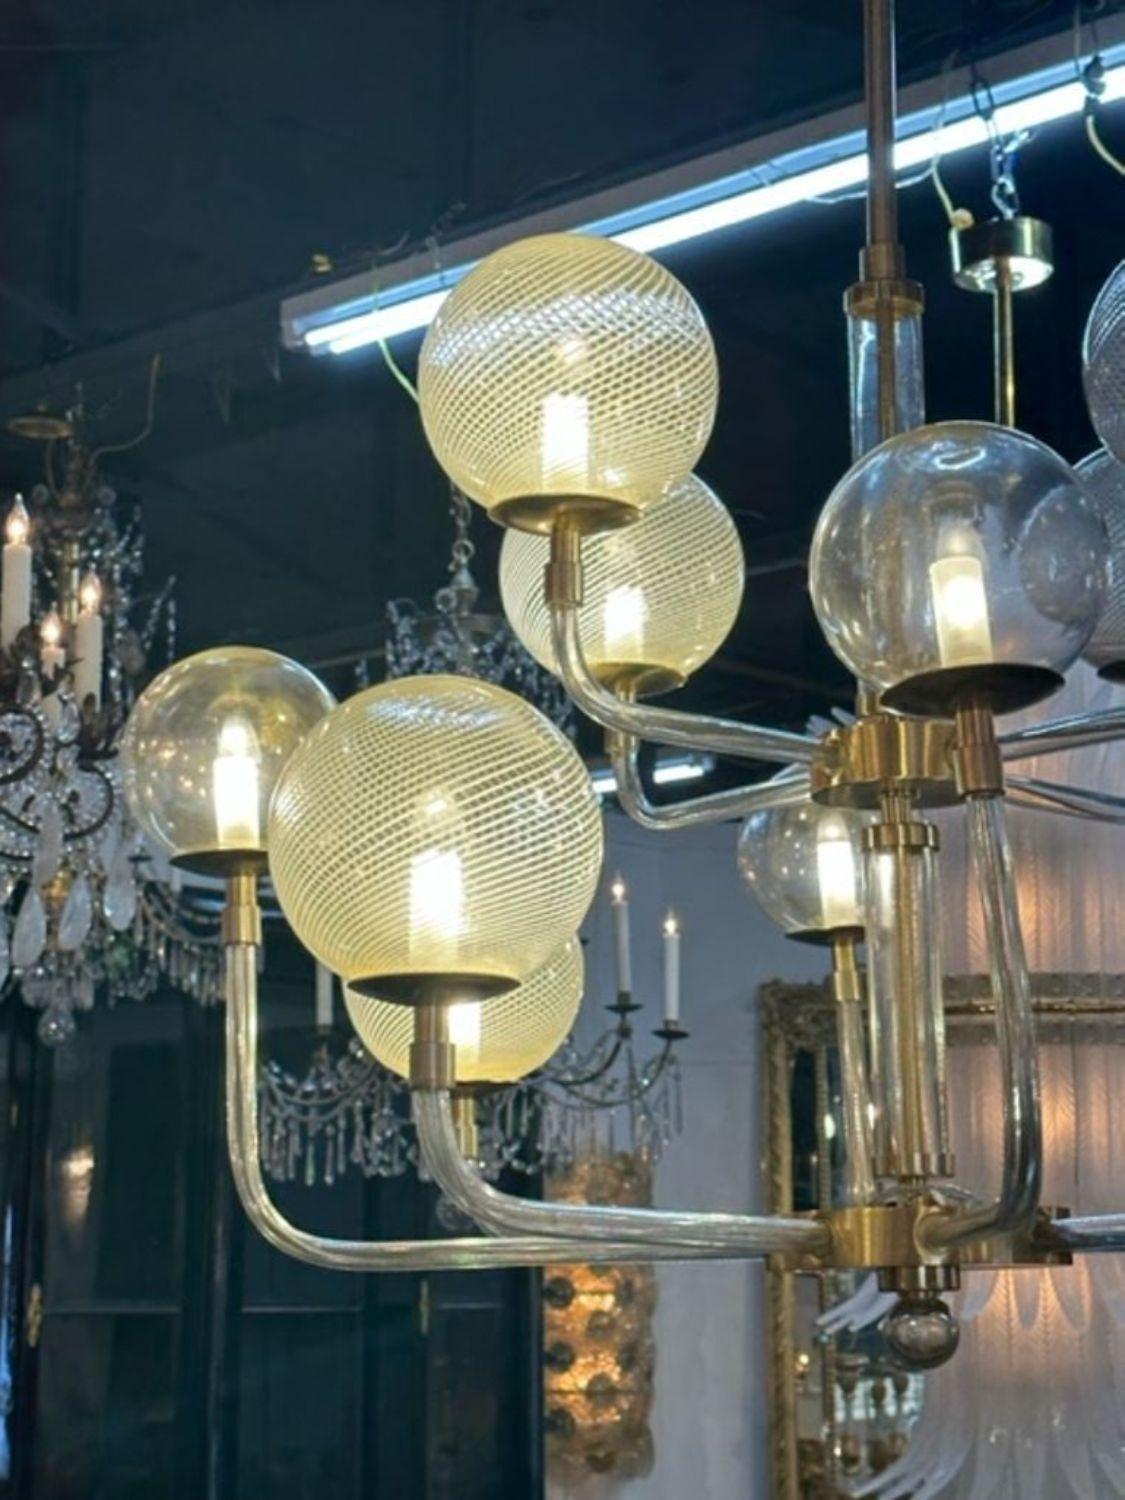 Modern Murano glass and brass globe chandelier. Lovely pattern on the globes along with beautiful glass arms and brass features. Creates an impressive look!